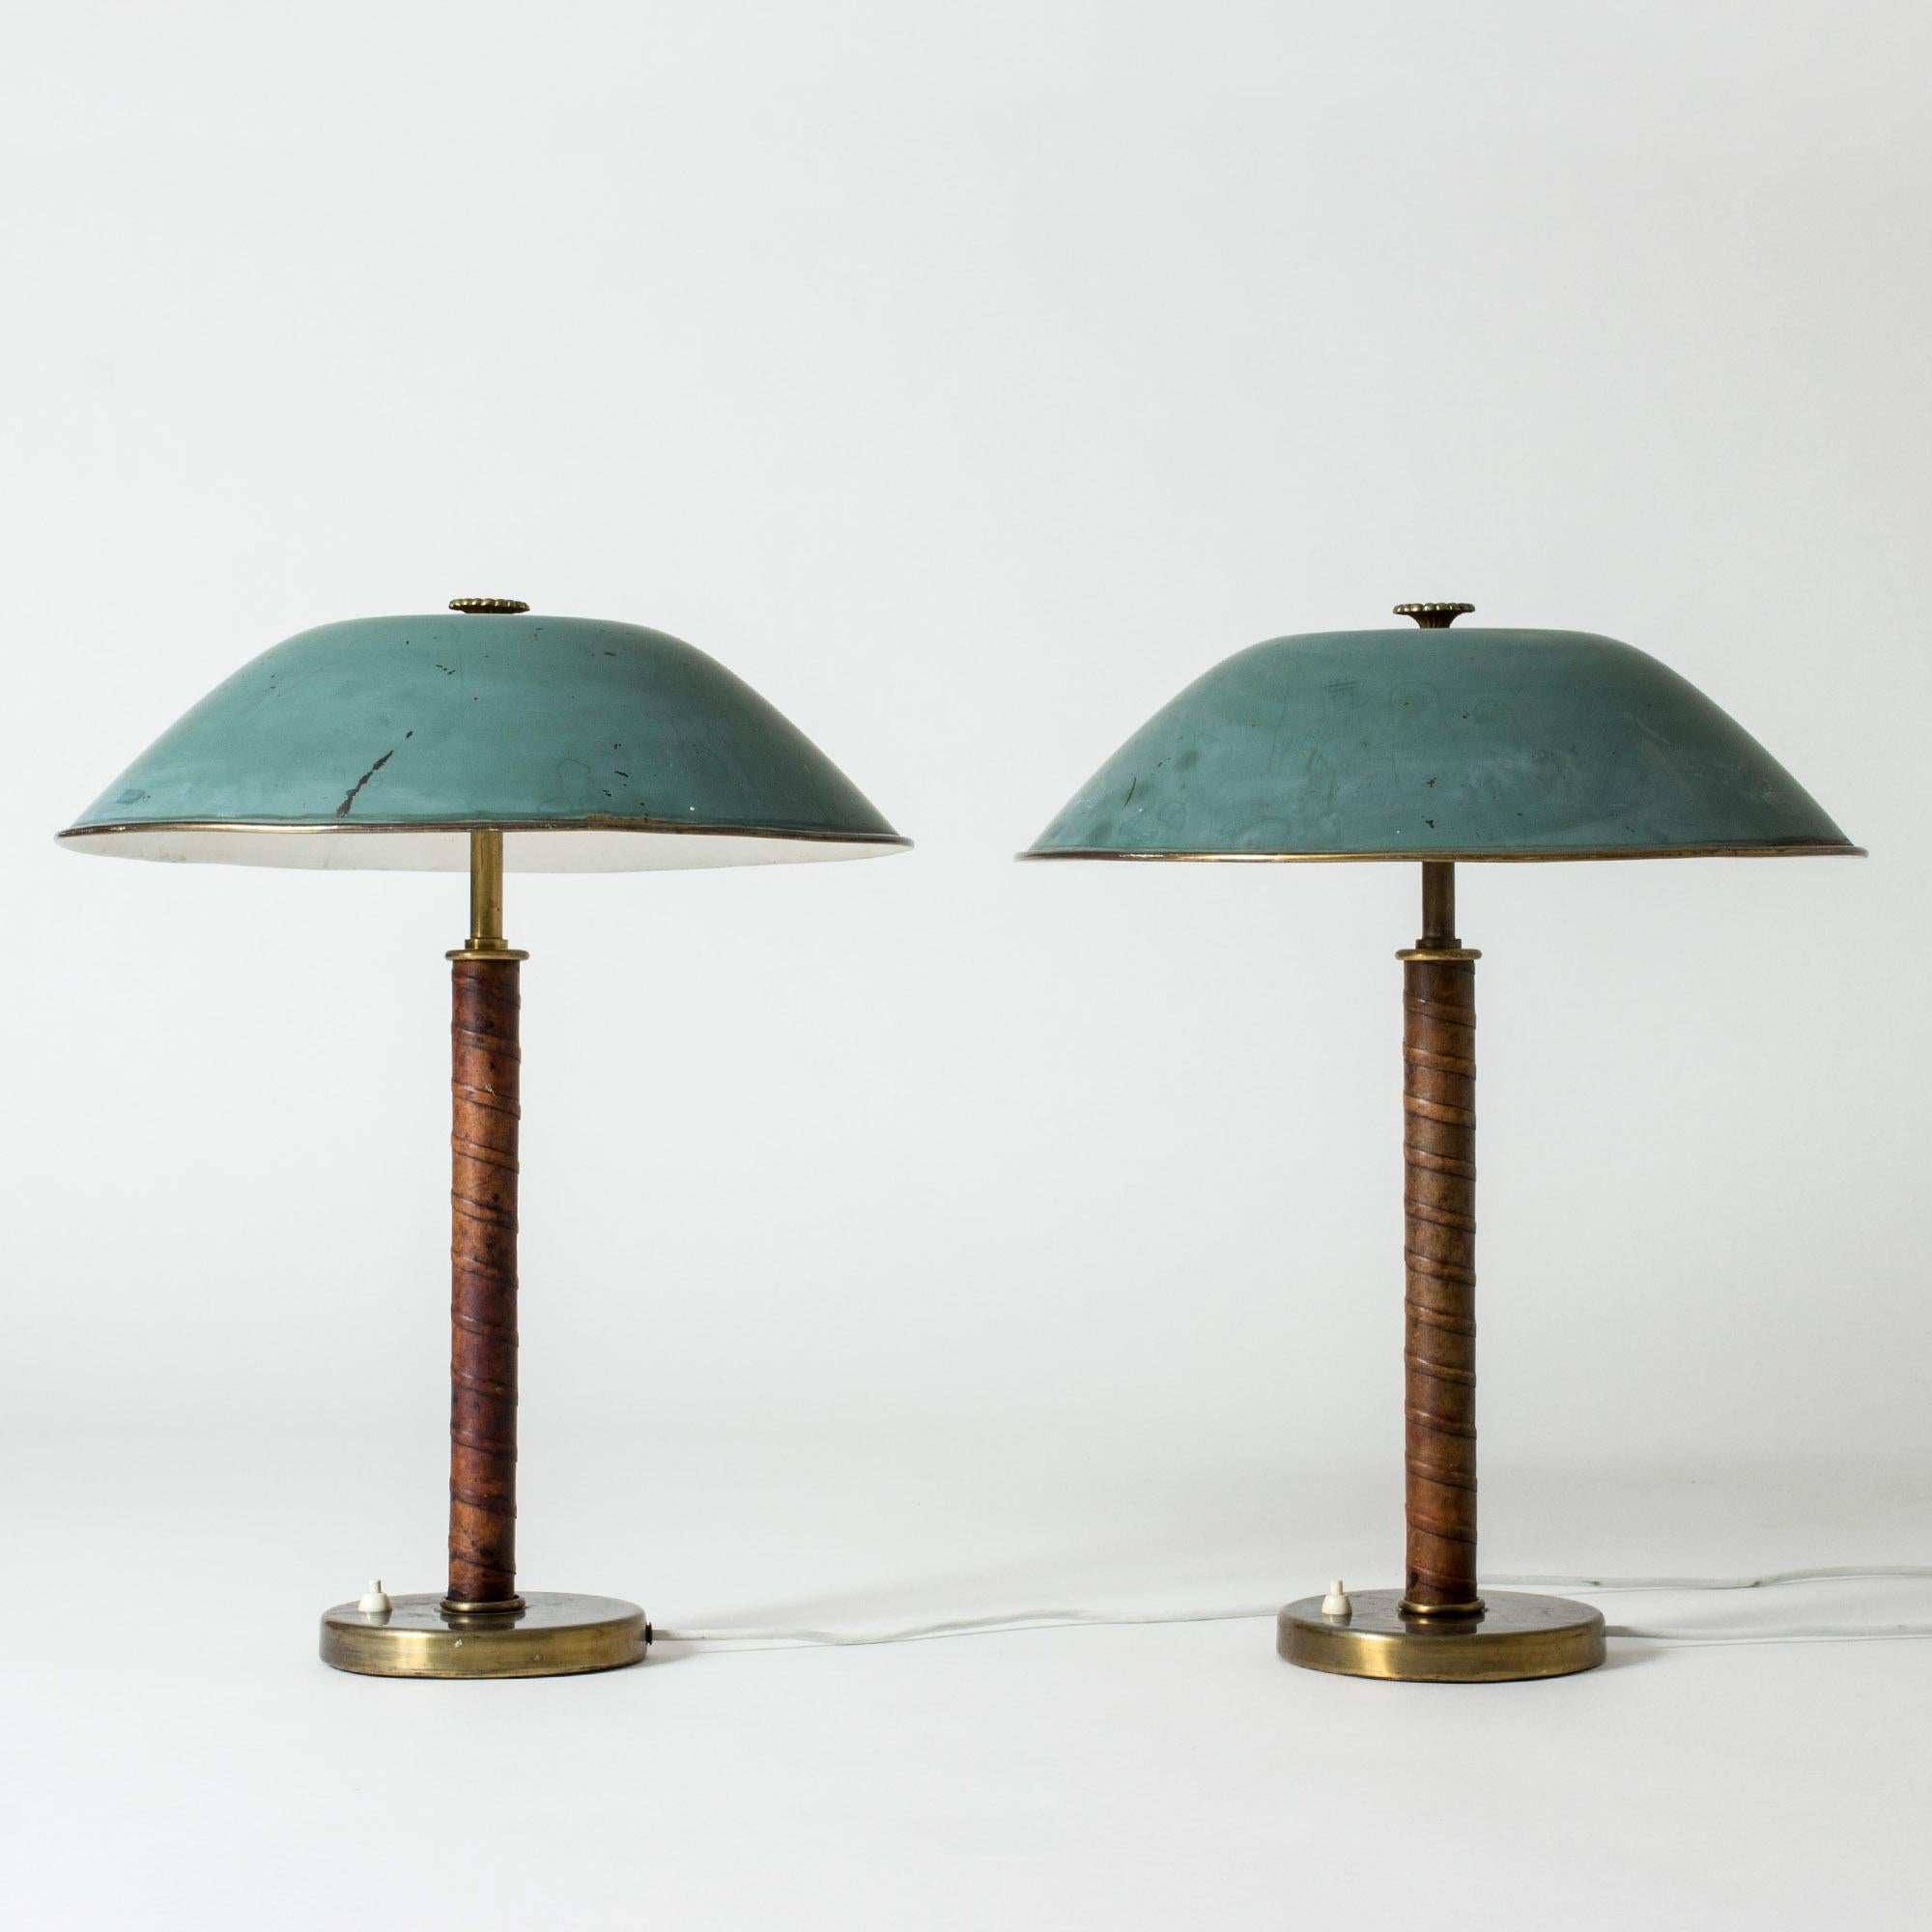 Pair of beautiful brass table lamps from NK, with green lacquered shades and leather wound stems. Decorative flower knobs on top. Original condition with wear on the shades.